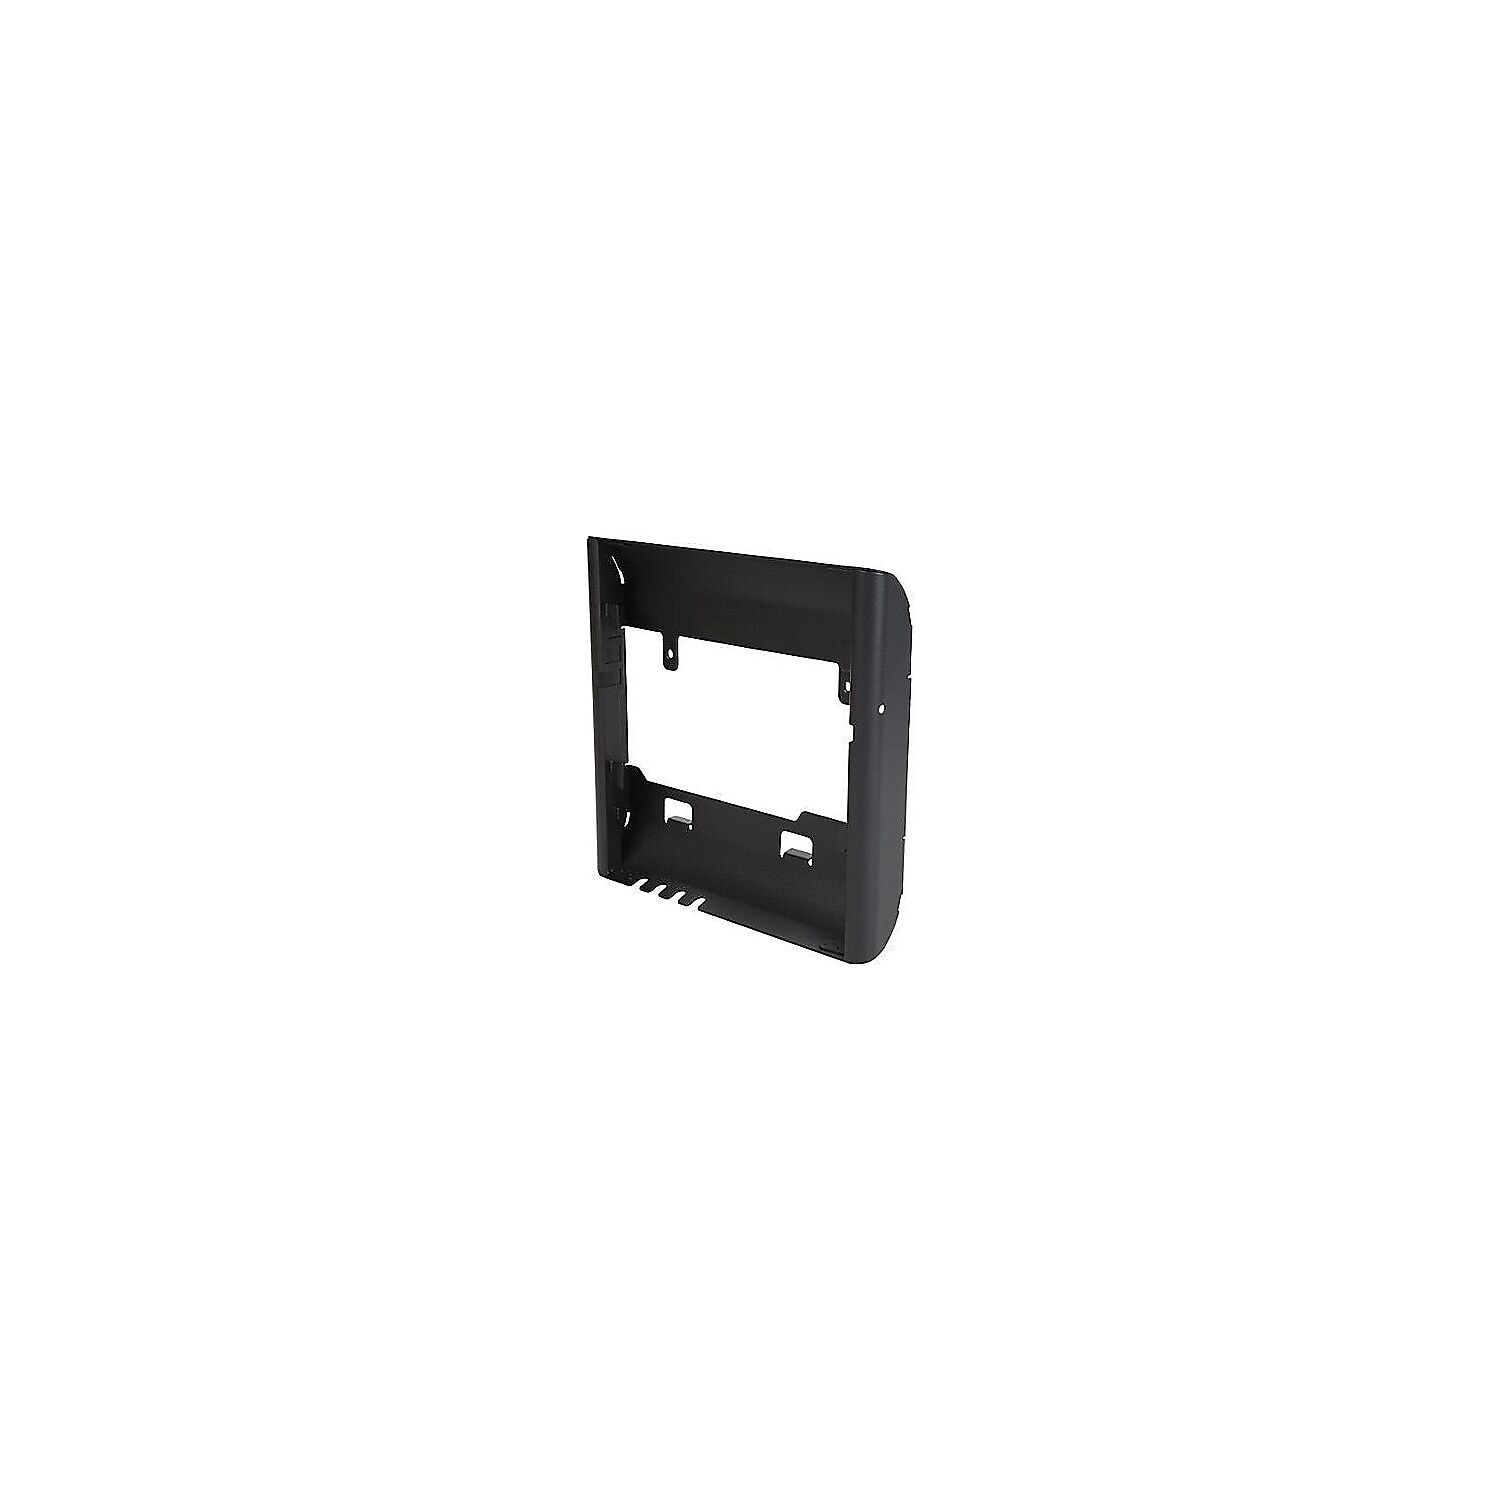 Cisco Spare Wall Mount Kit for IP Phone 7800 Series CP-7800-WMK